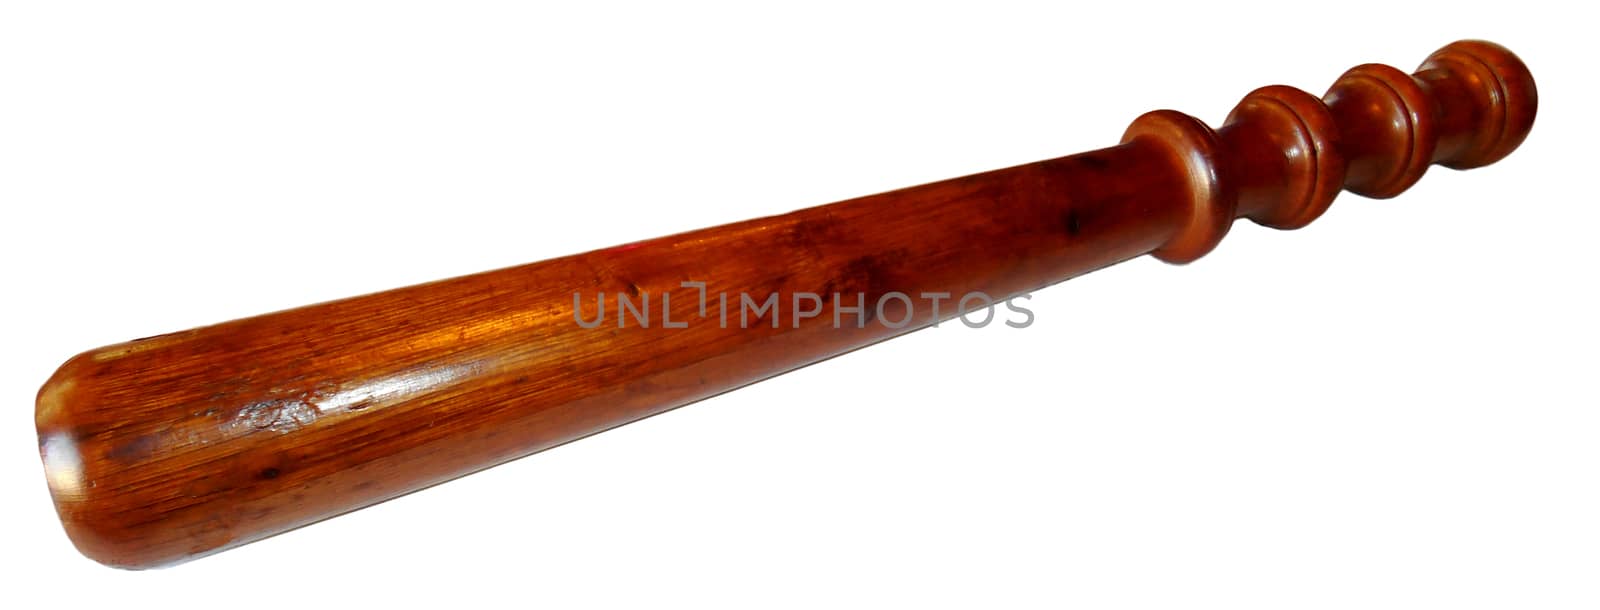 Old fashioned Greek police stick, isolated on white.

Picture taken on November 21, 2014.